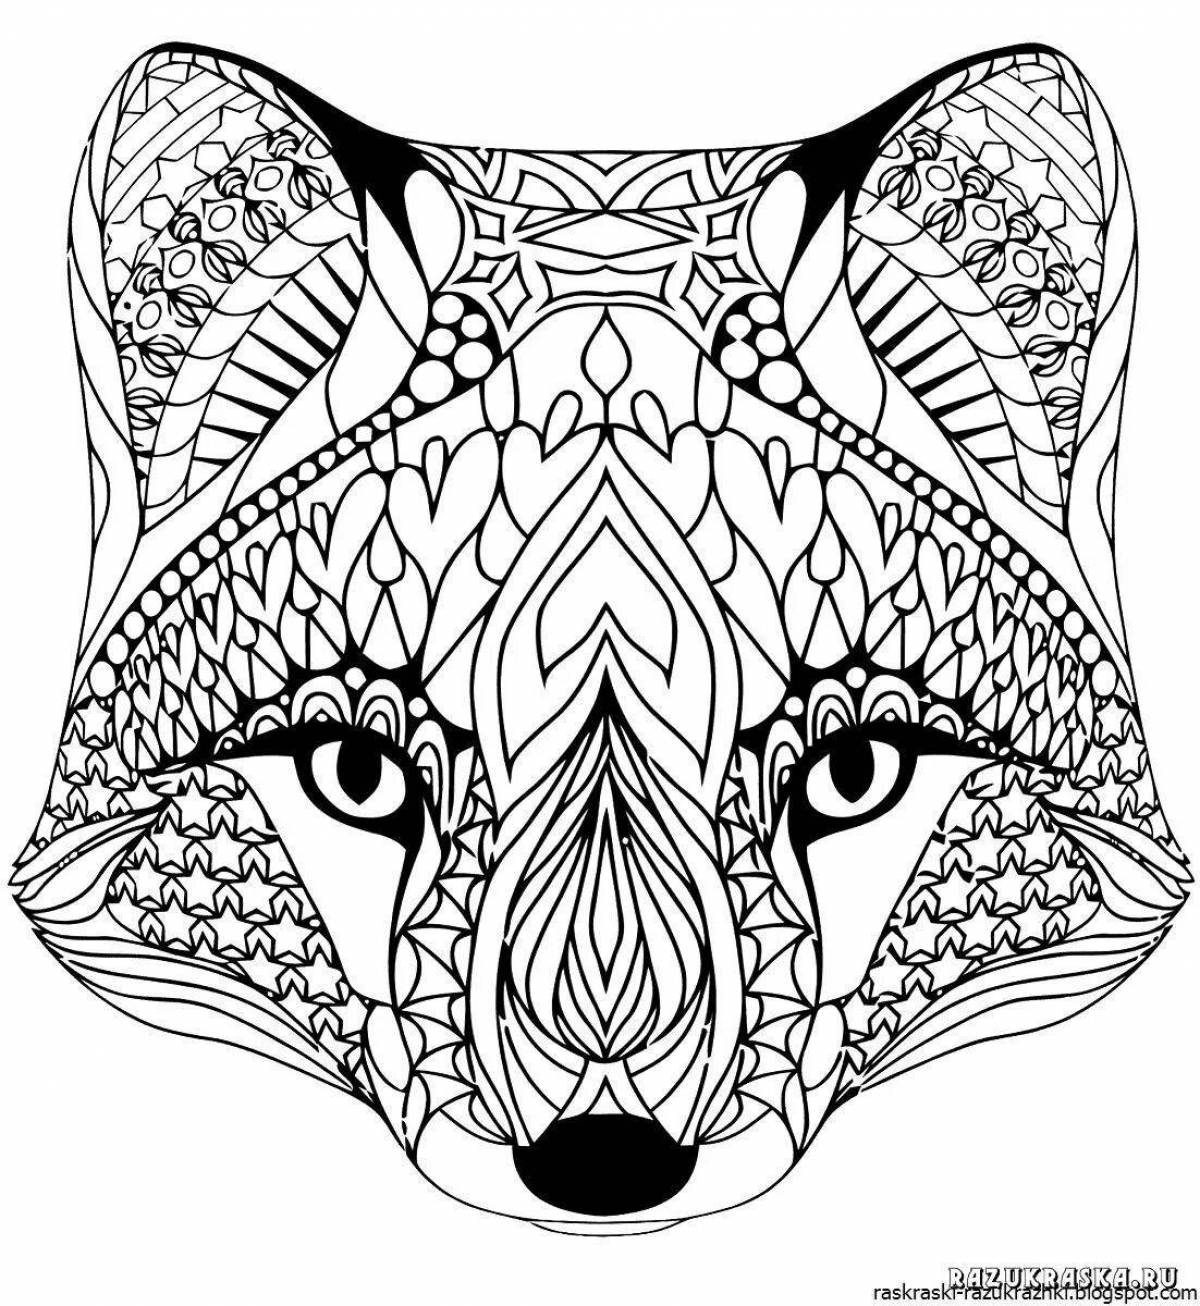 Colourful antistress coloring book for girls animals